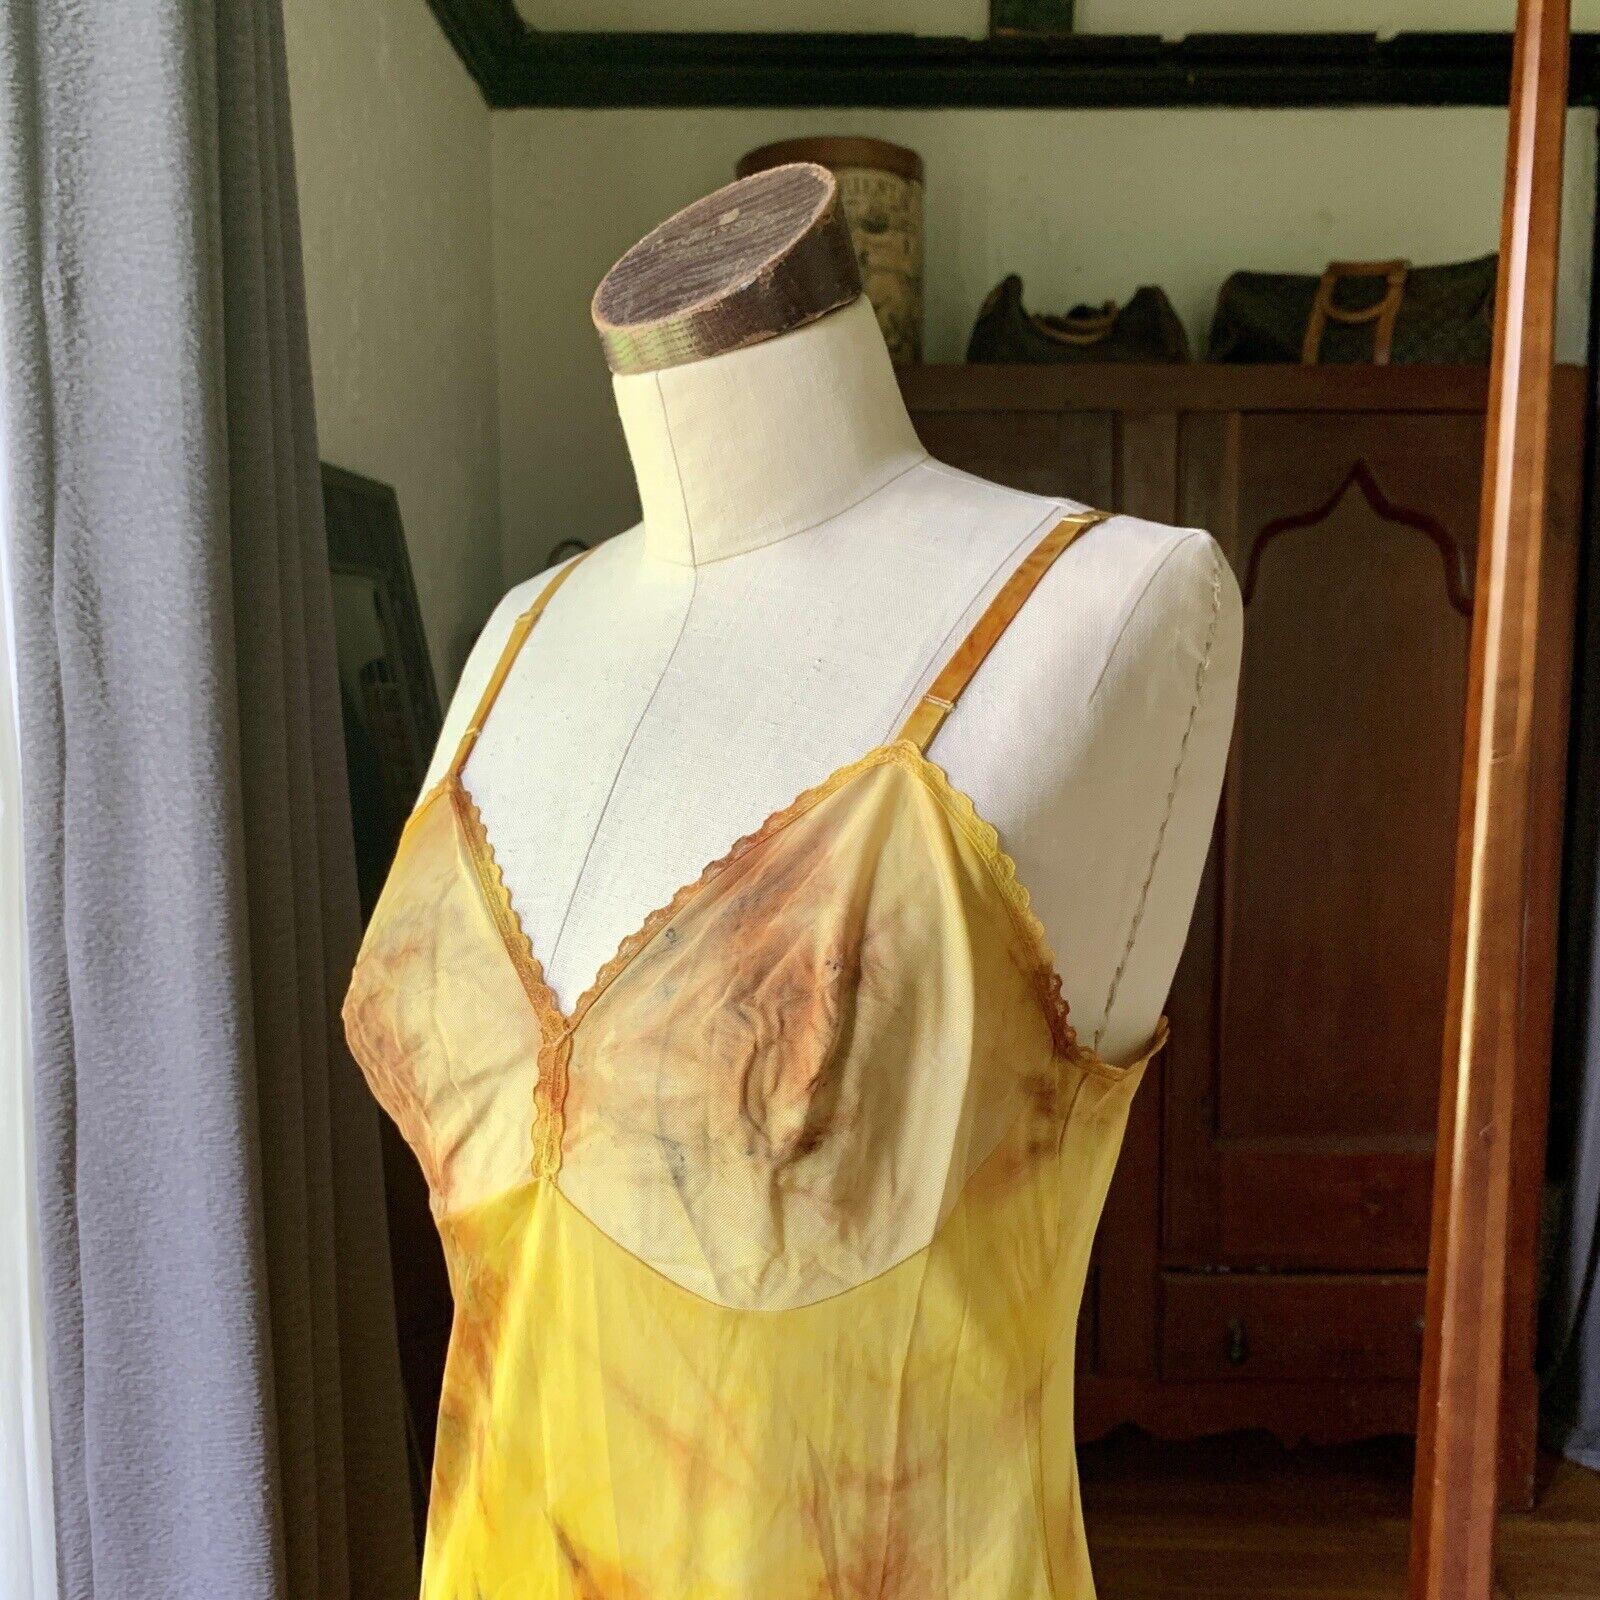 DYED PETALS Vintage Hand Botanically Dyed Tie-Dyed Slip Dress S/M 34 In Good Condition For Sale In Asheville, NC